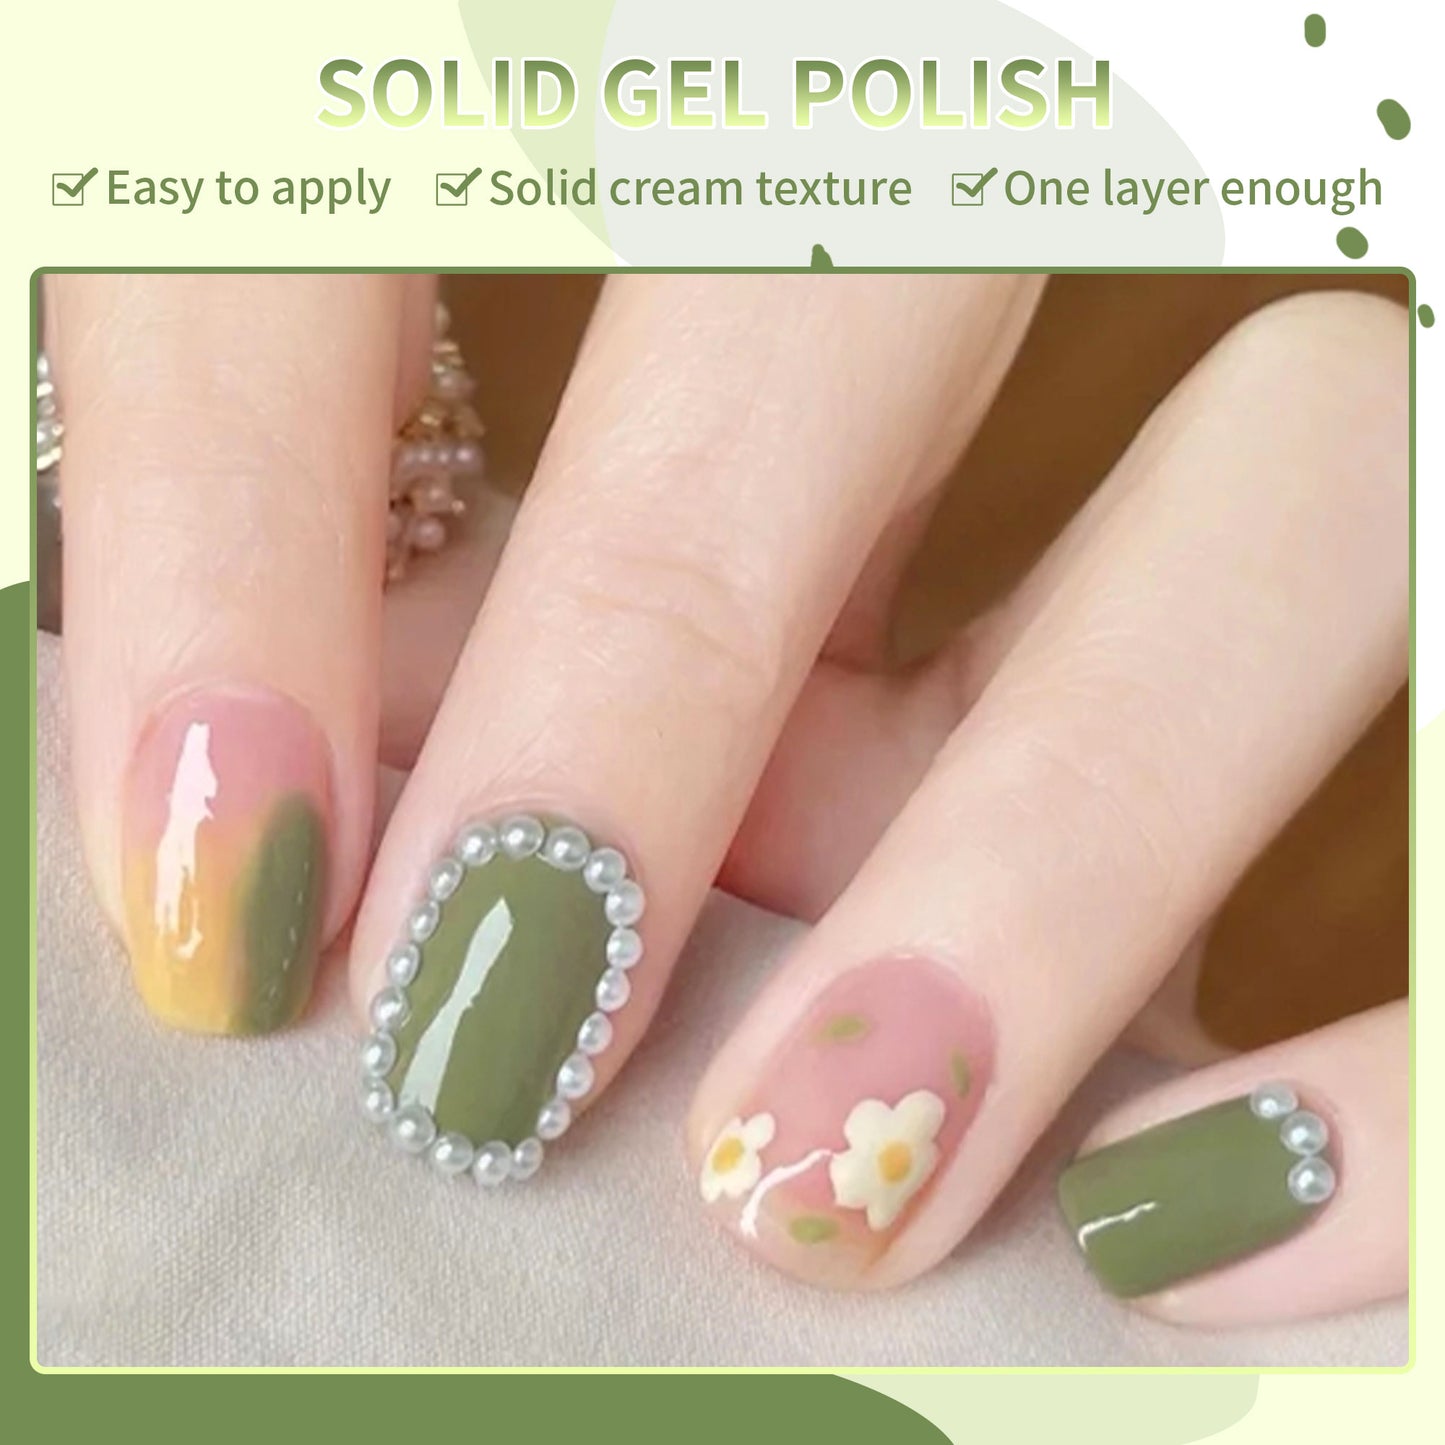 3 Colors in 1 Solid Cream Gel Polish - Nude, Olive Green, Light Green